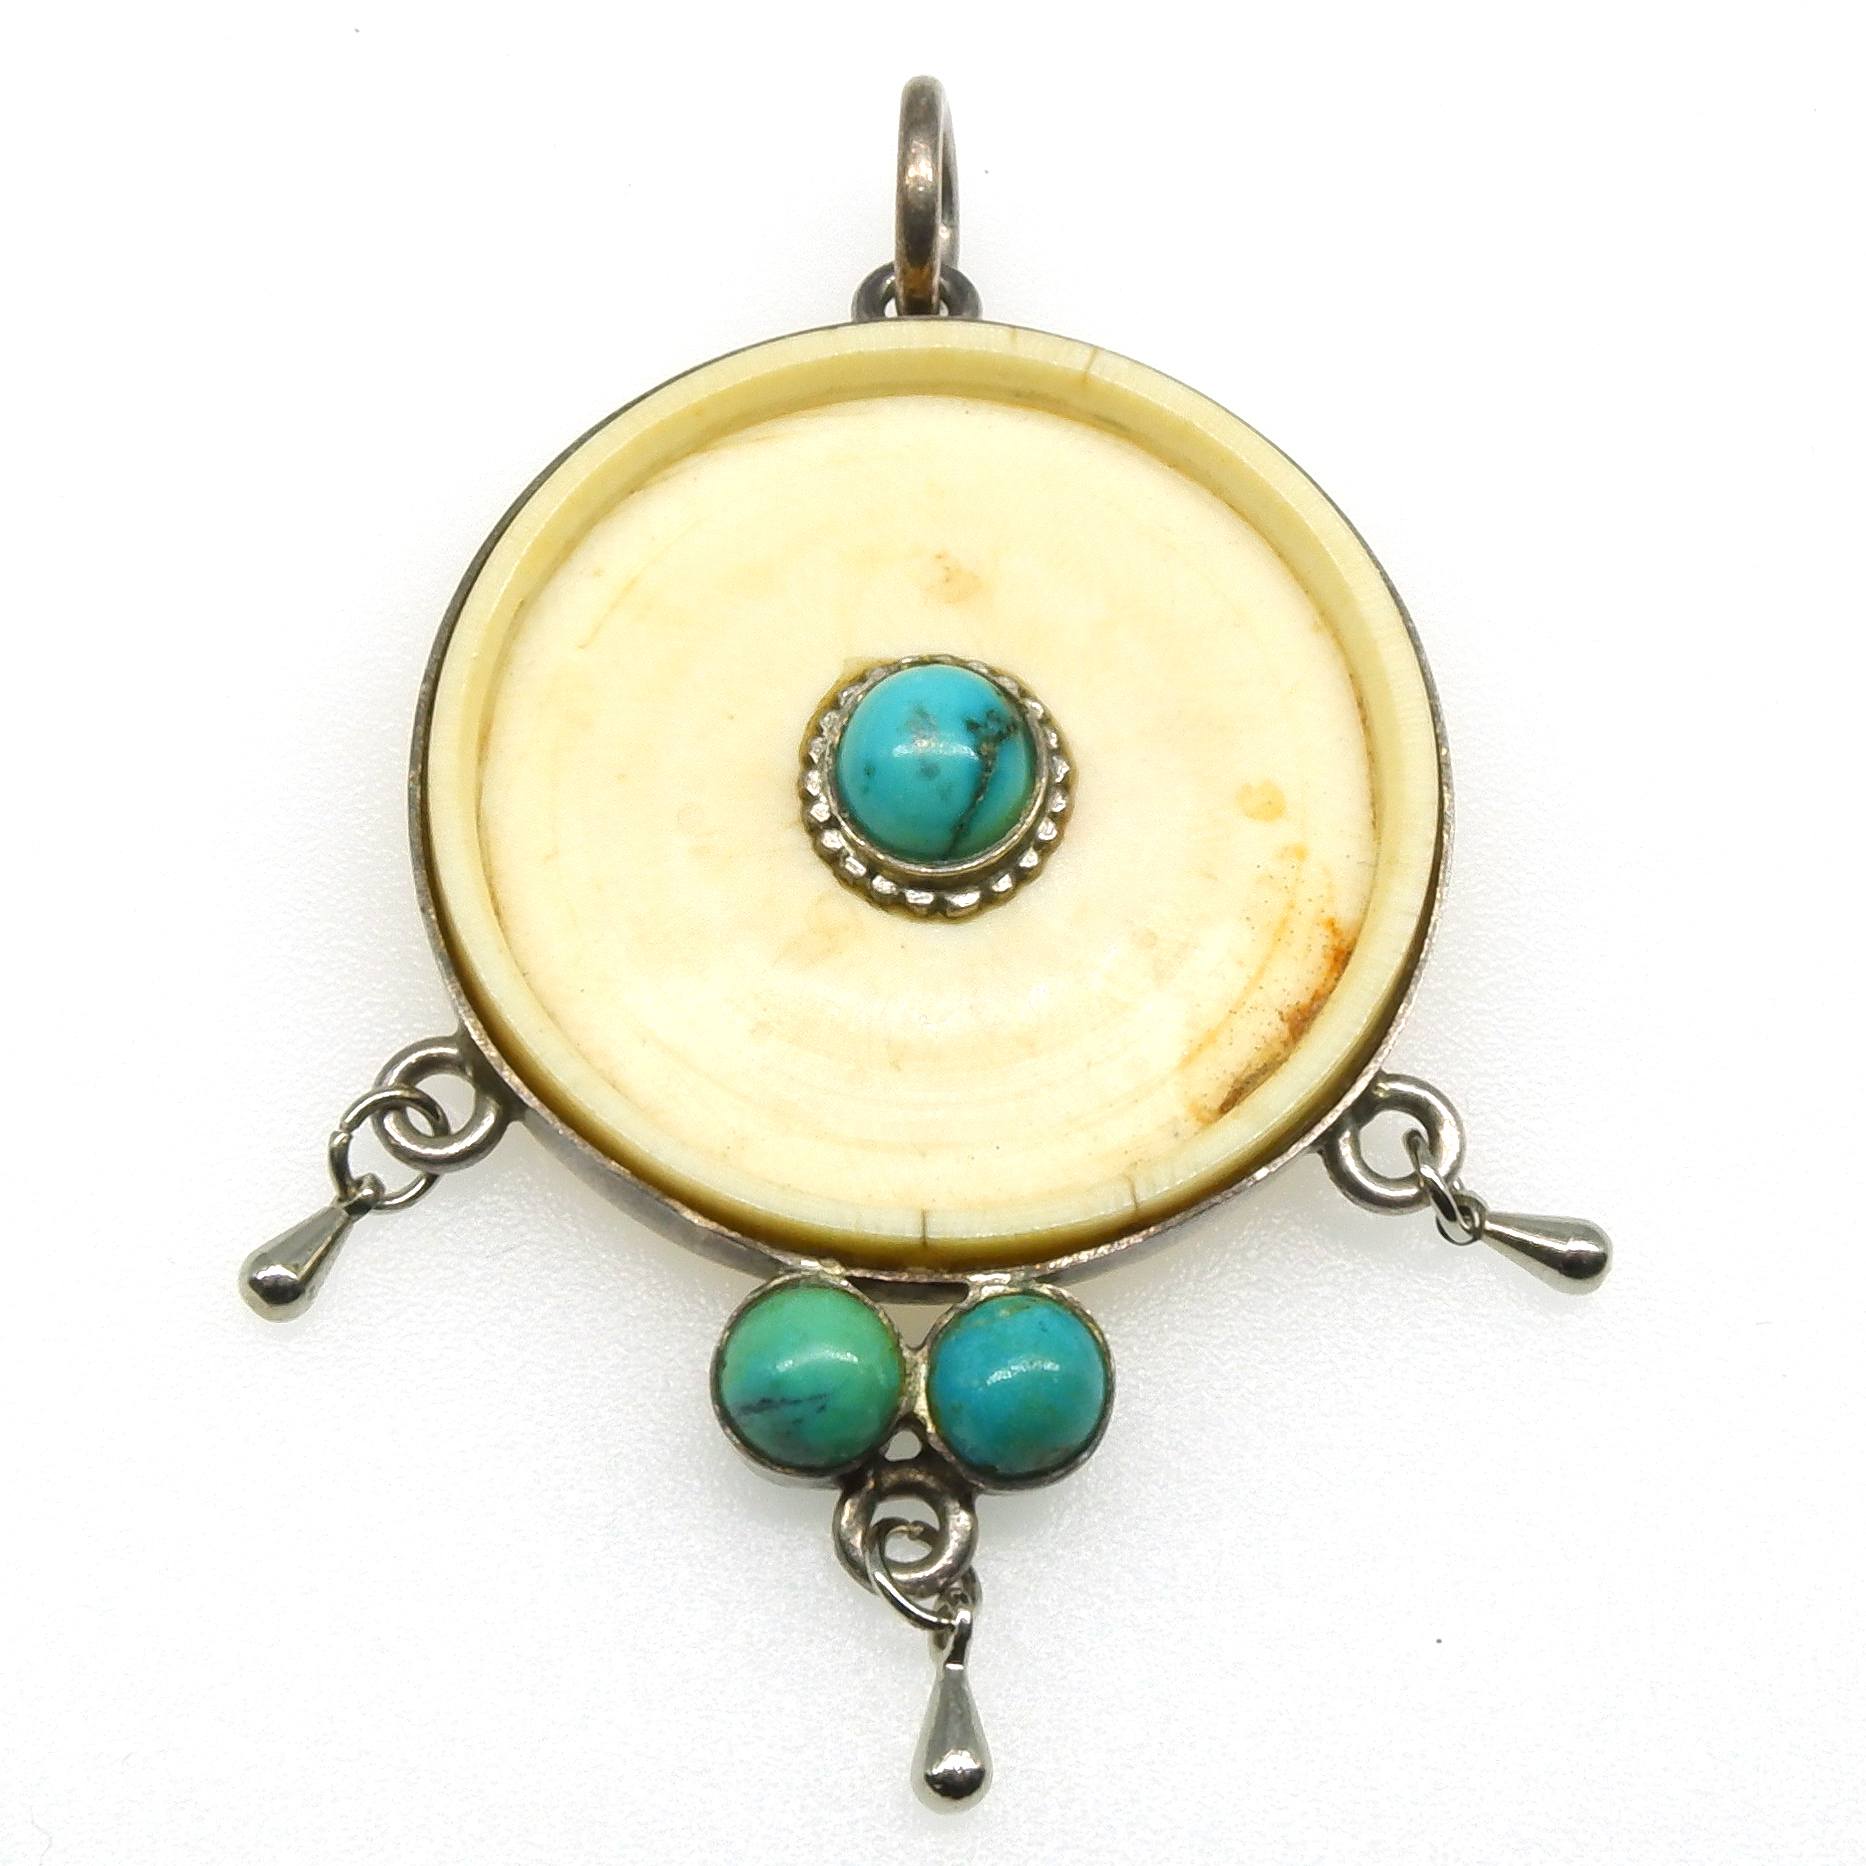 'Antique Ivory Disk With Centre Turquoise Cabochon Pendant in Bezel Setting and Two Turquoise at the Base in Silver'